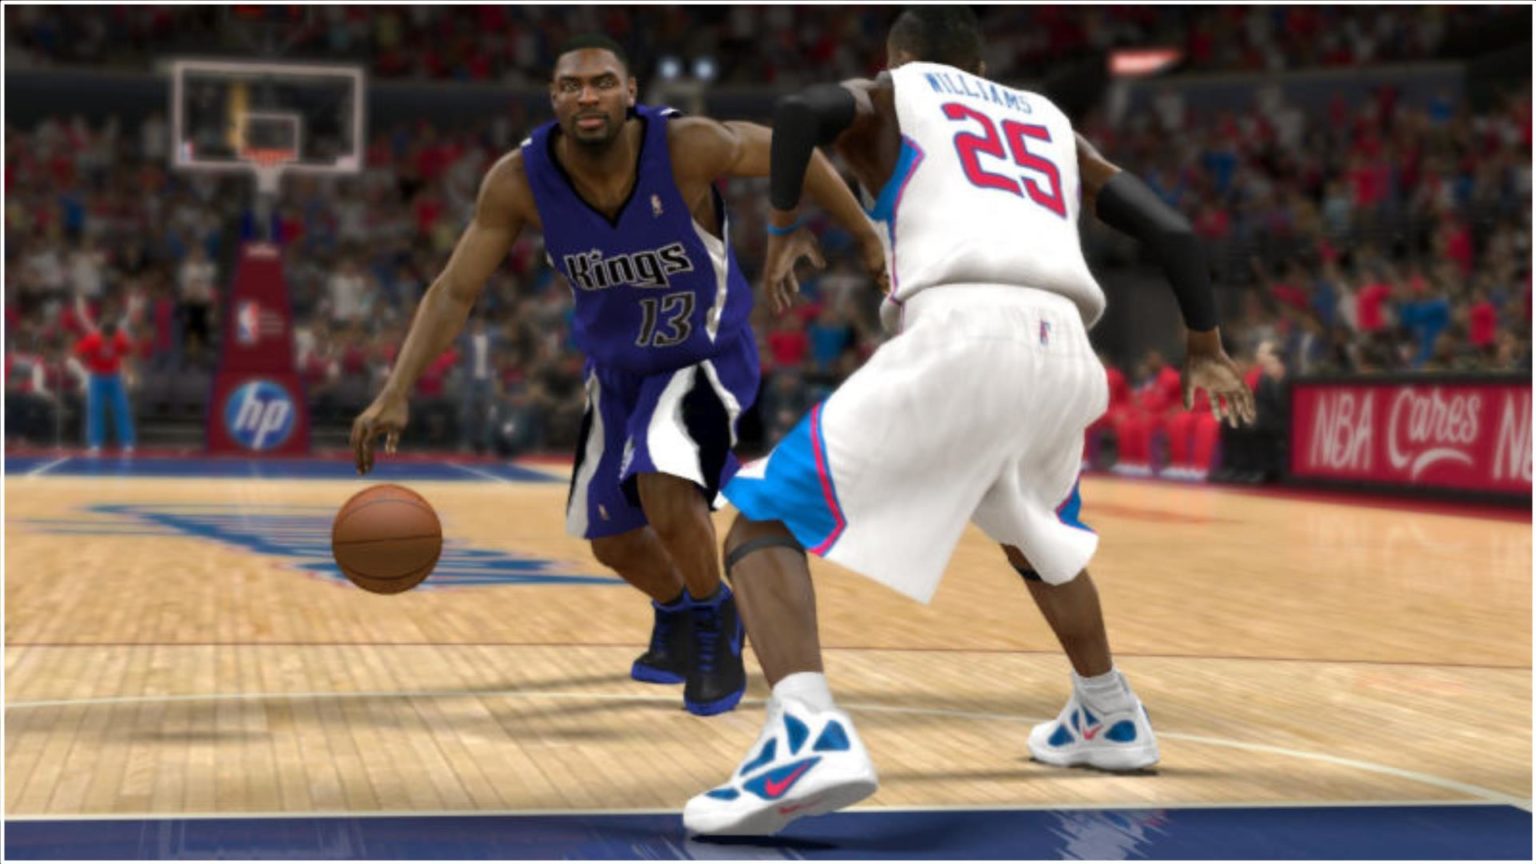 NBA 2k12 PPSSPP ISO Highly Compressed 600MB Free Download 4